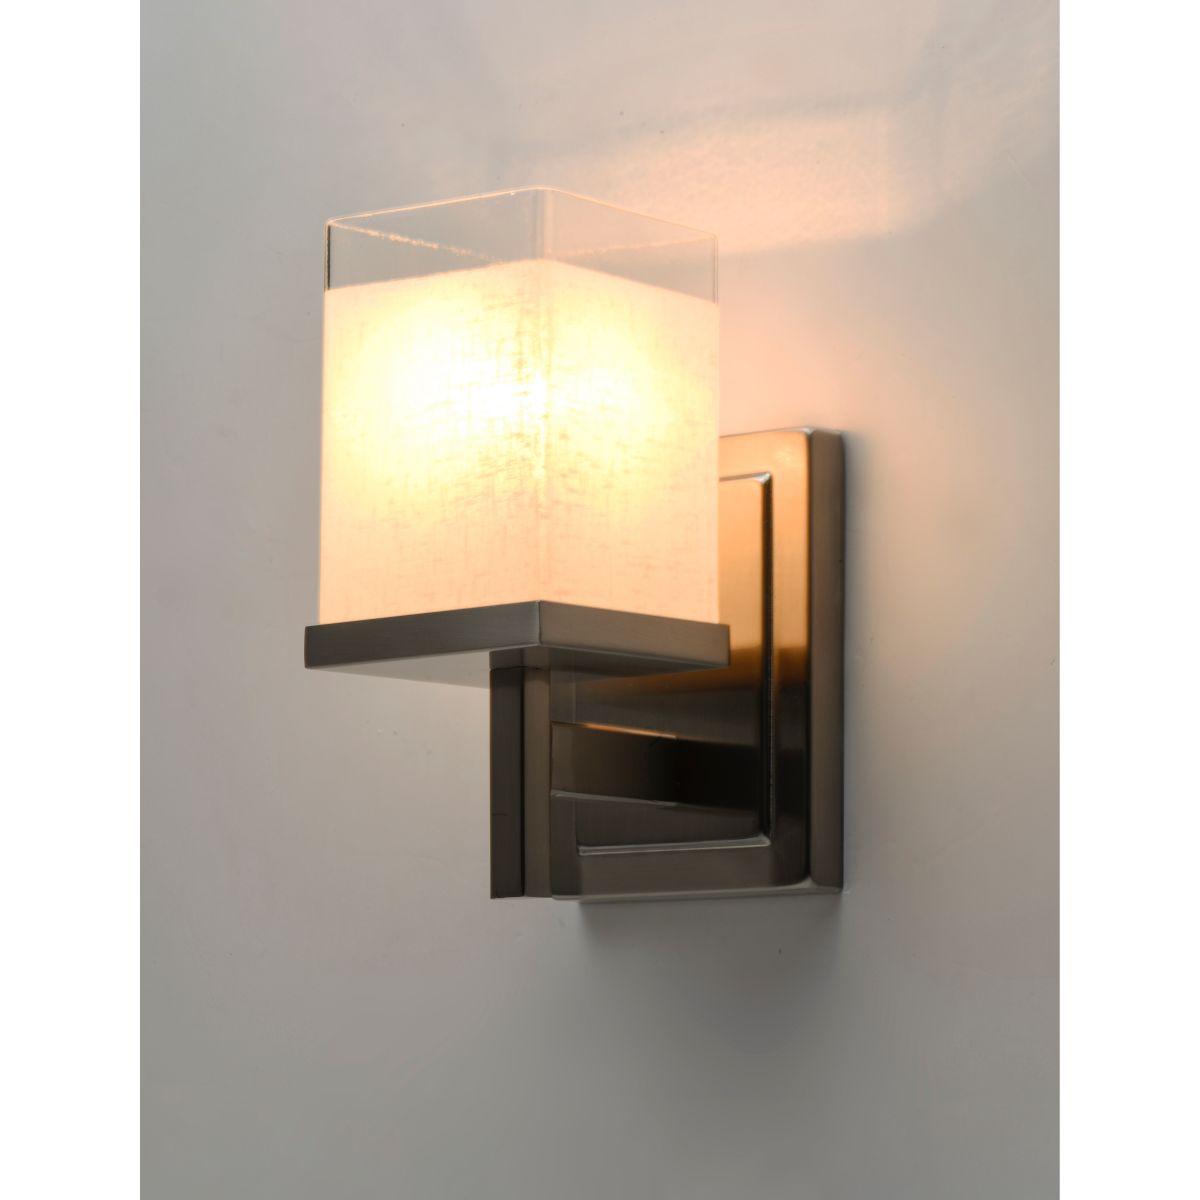 Tetra 9 in. Armed Sconce